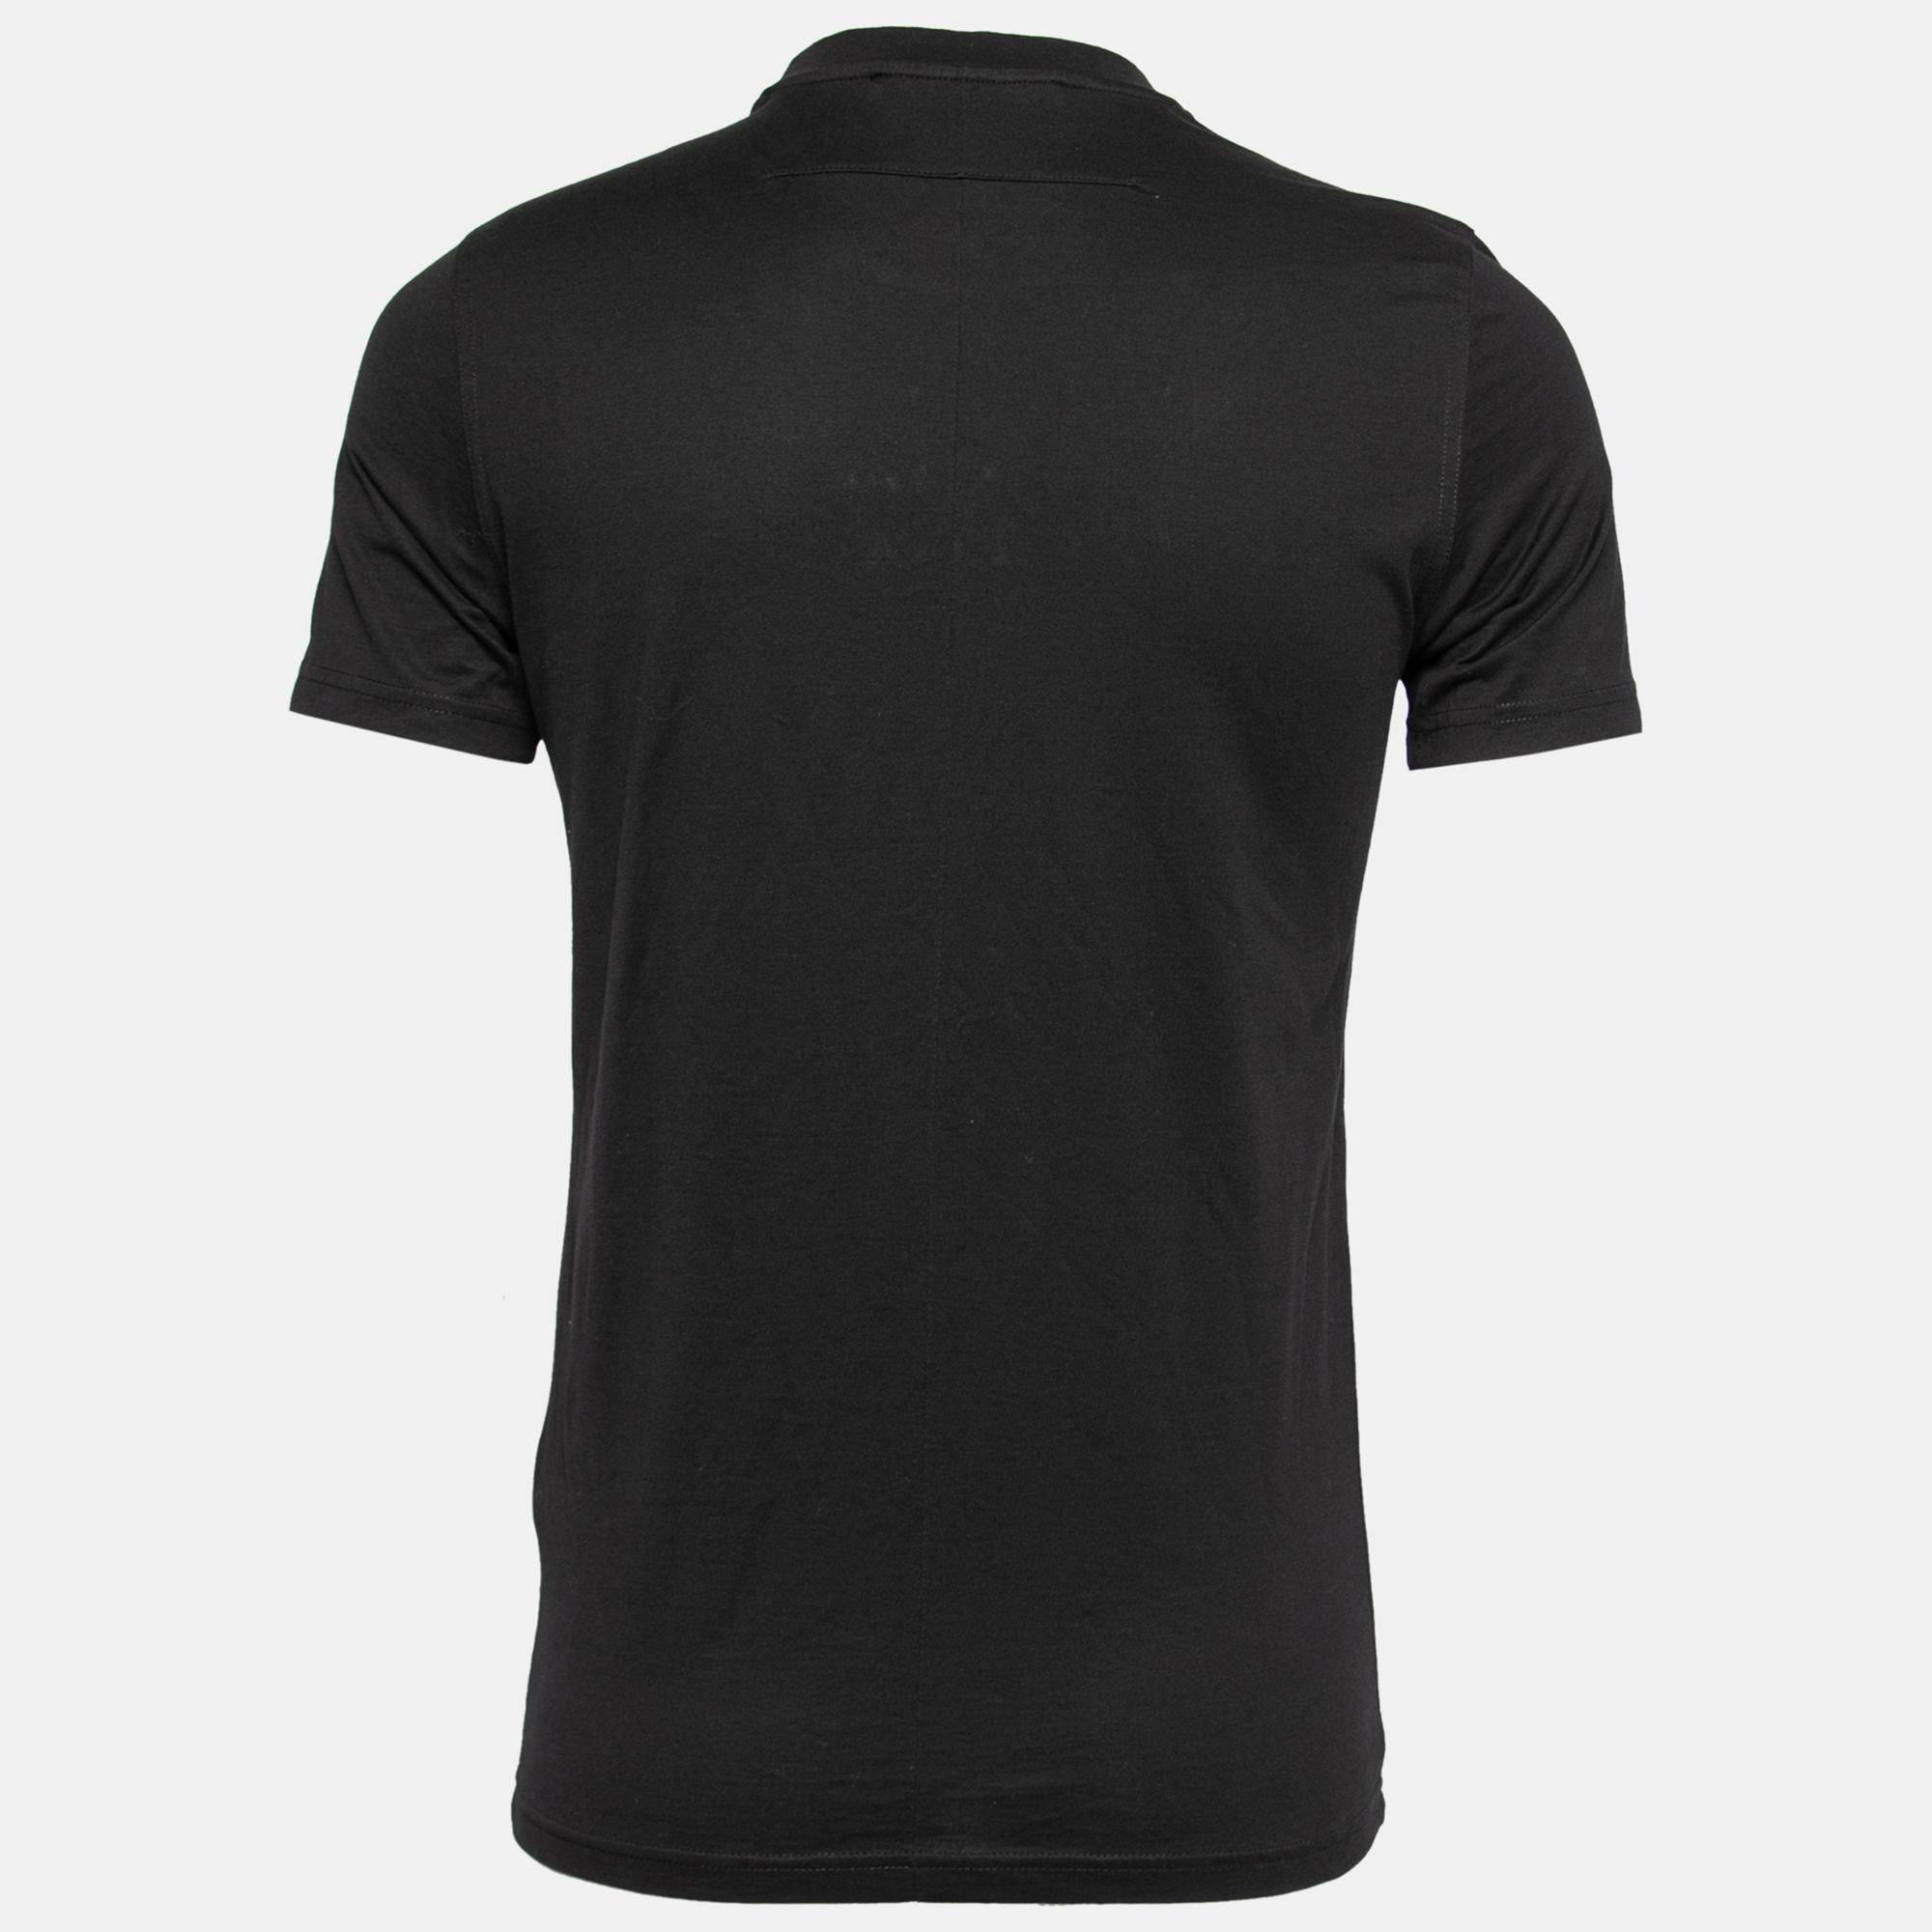 Givenchy brings you a simple t-shirt elevated by the floral 17 printed on the front. It has been tailored from cotton in a black shade and features short sleeves. Style the creation with sneakers and denim pants for a cool and casual look.

